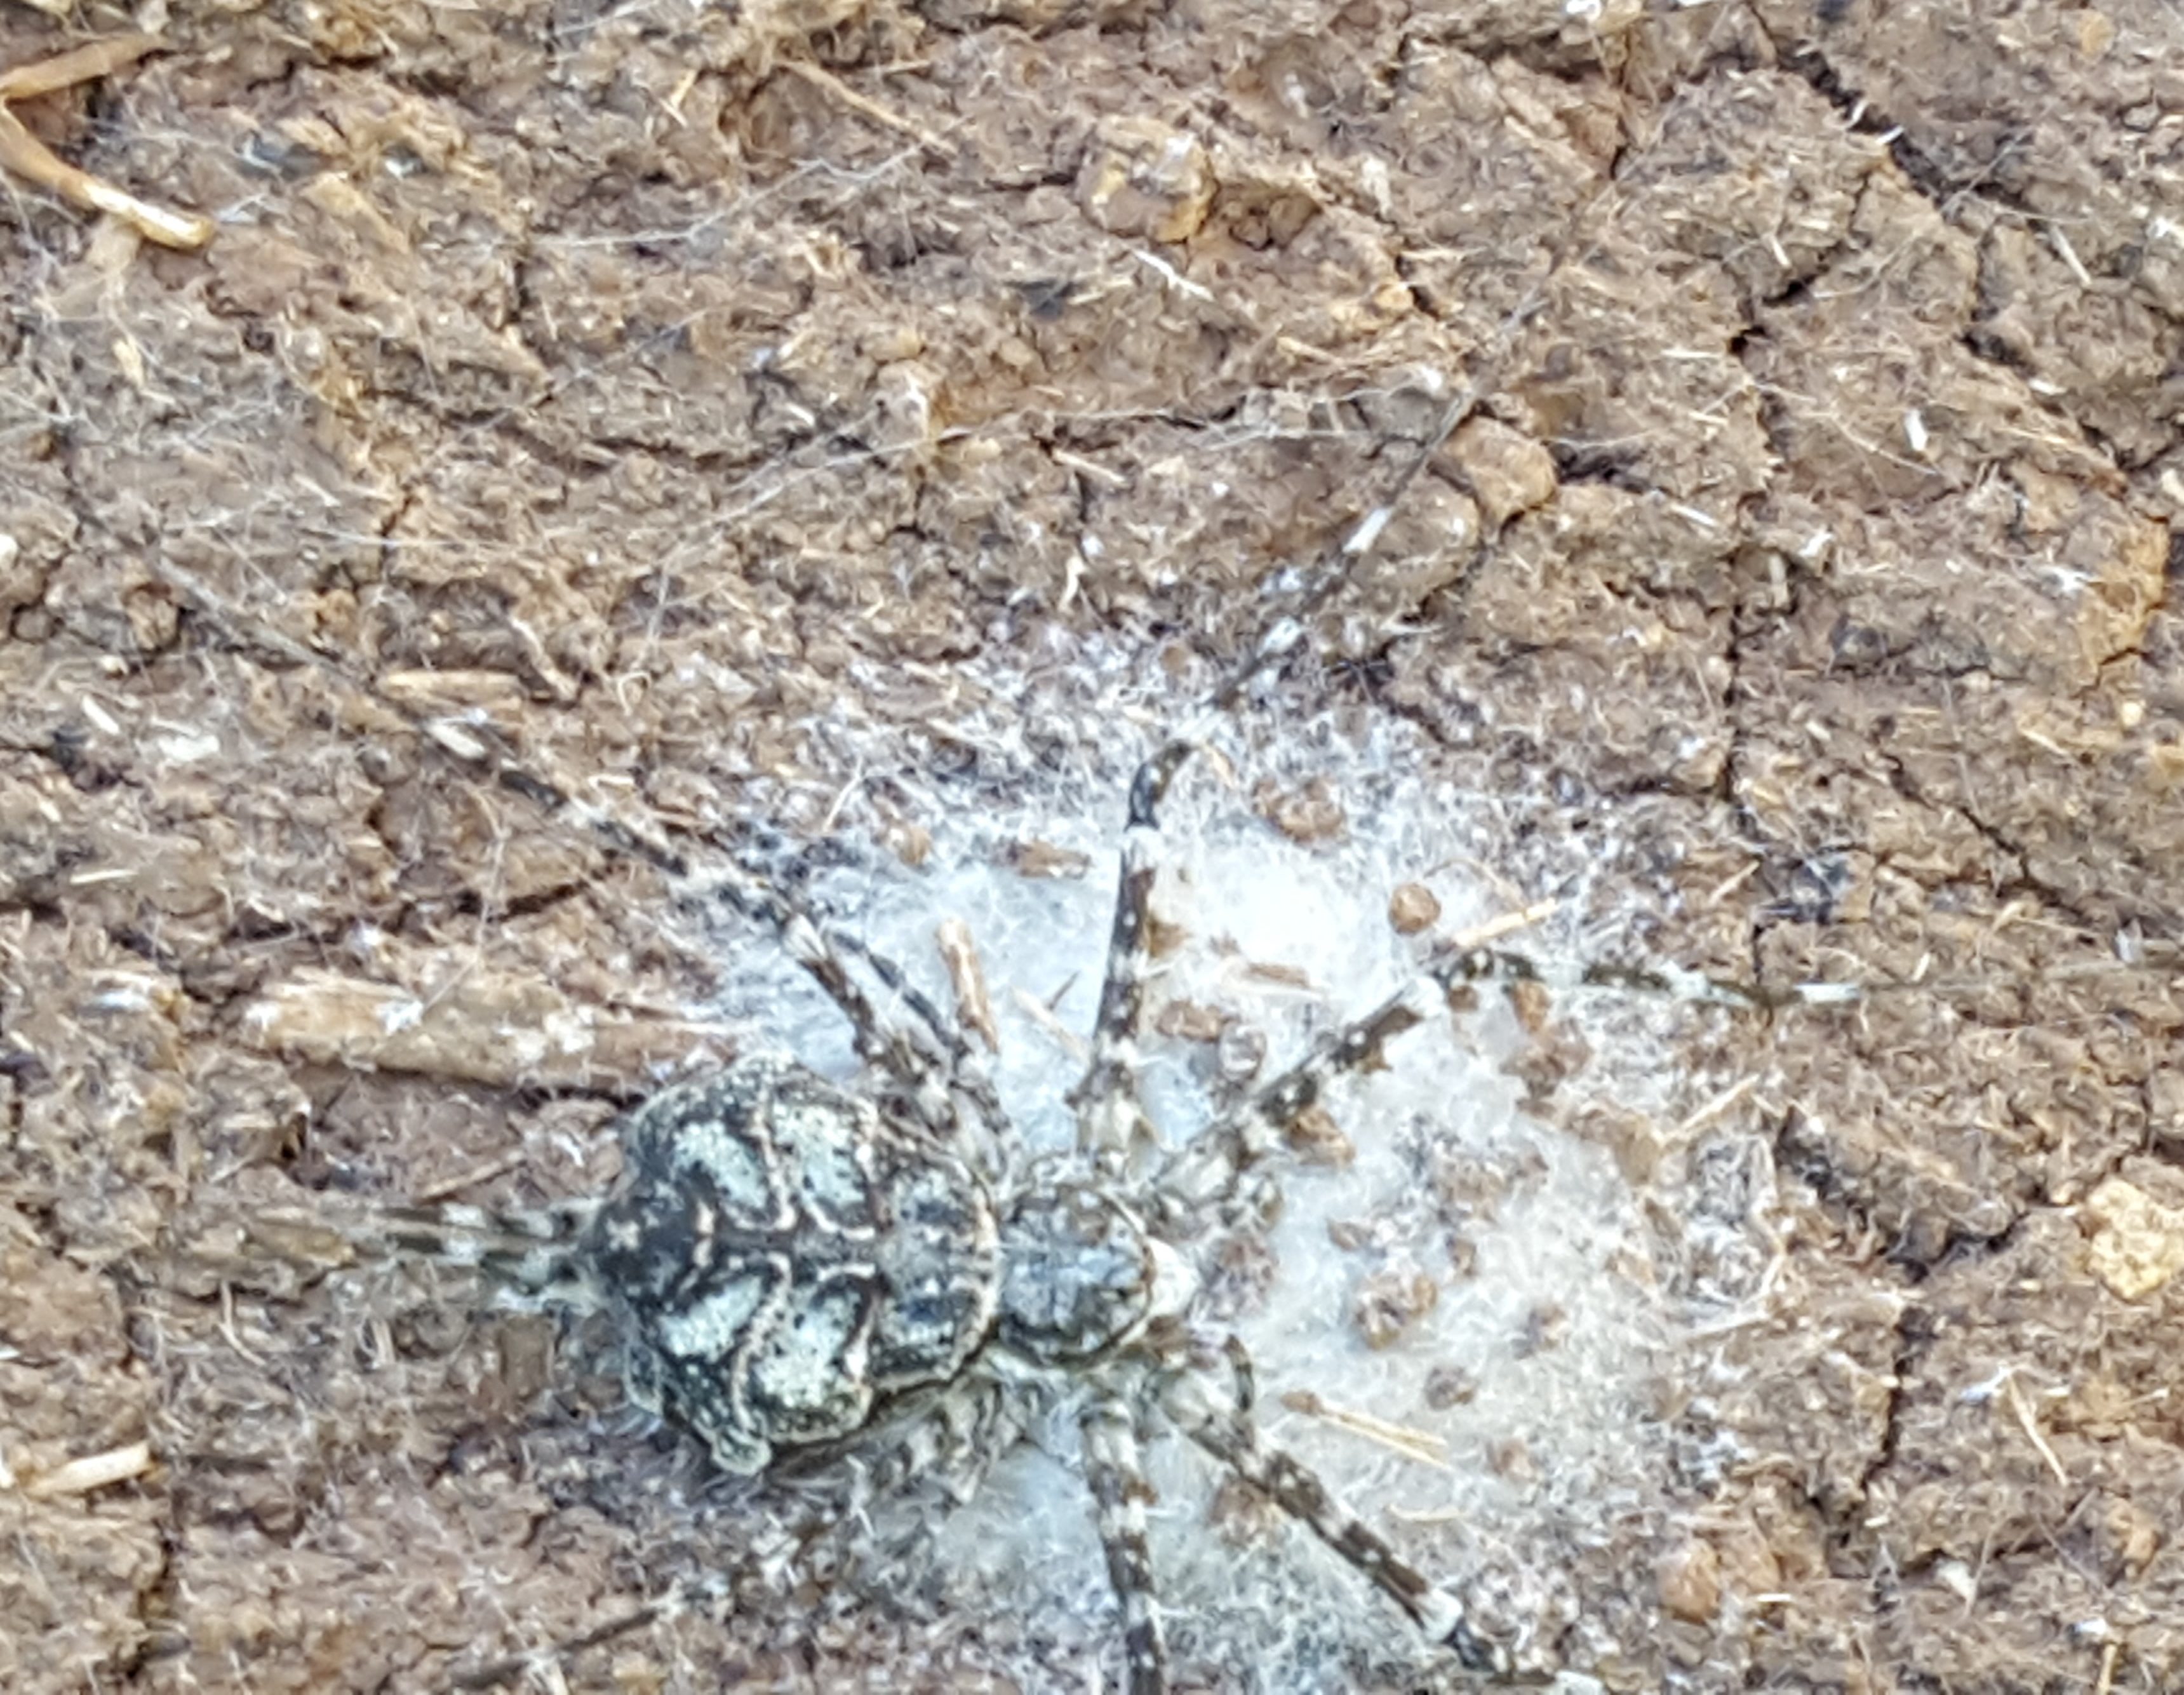 Picture of Hersiliidae (Two-tailed Spiders) - Dorsal,Egg sacs